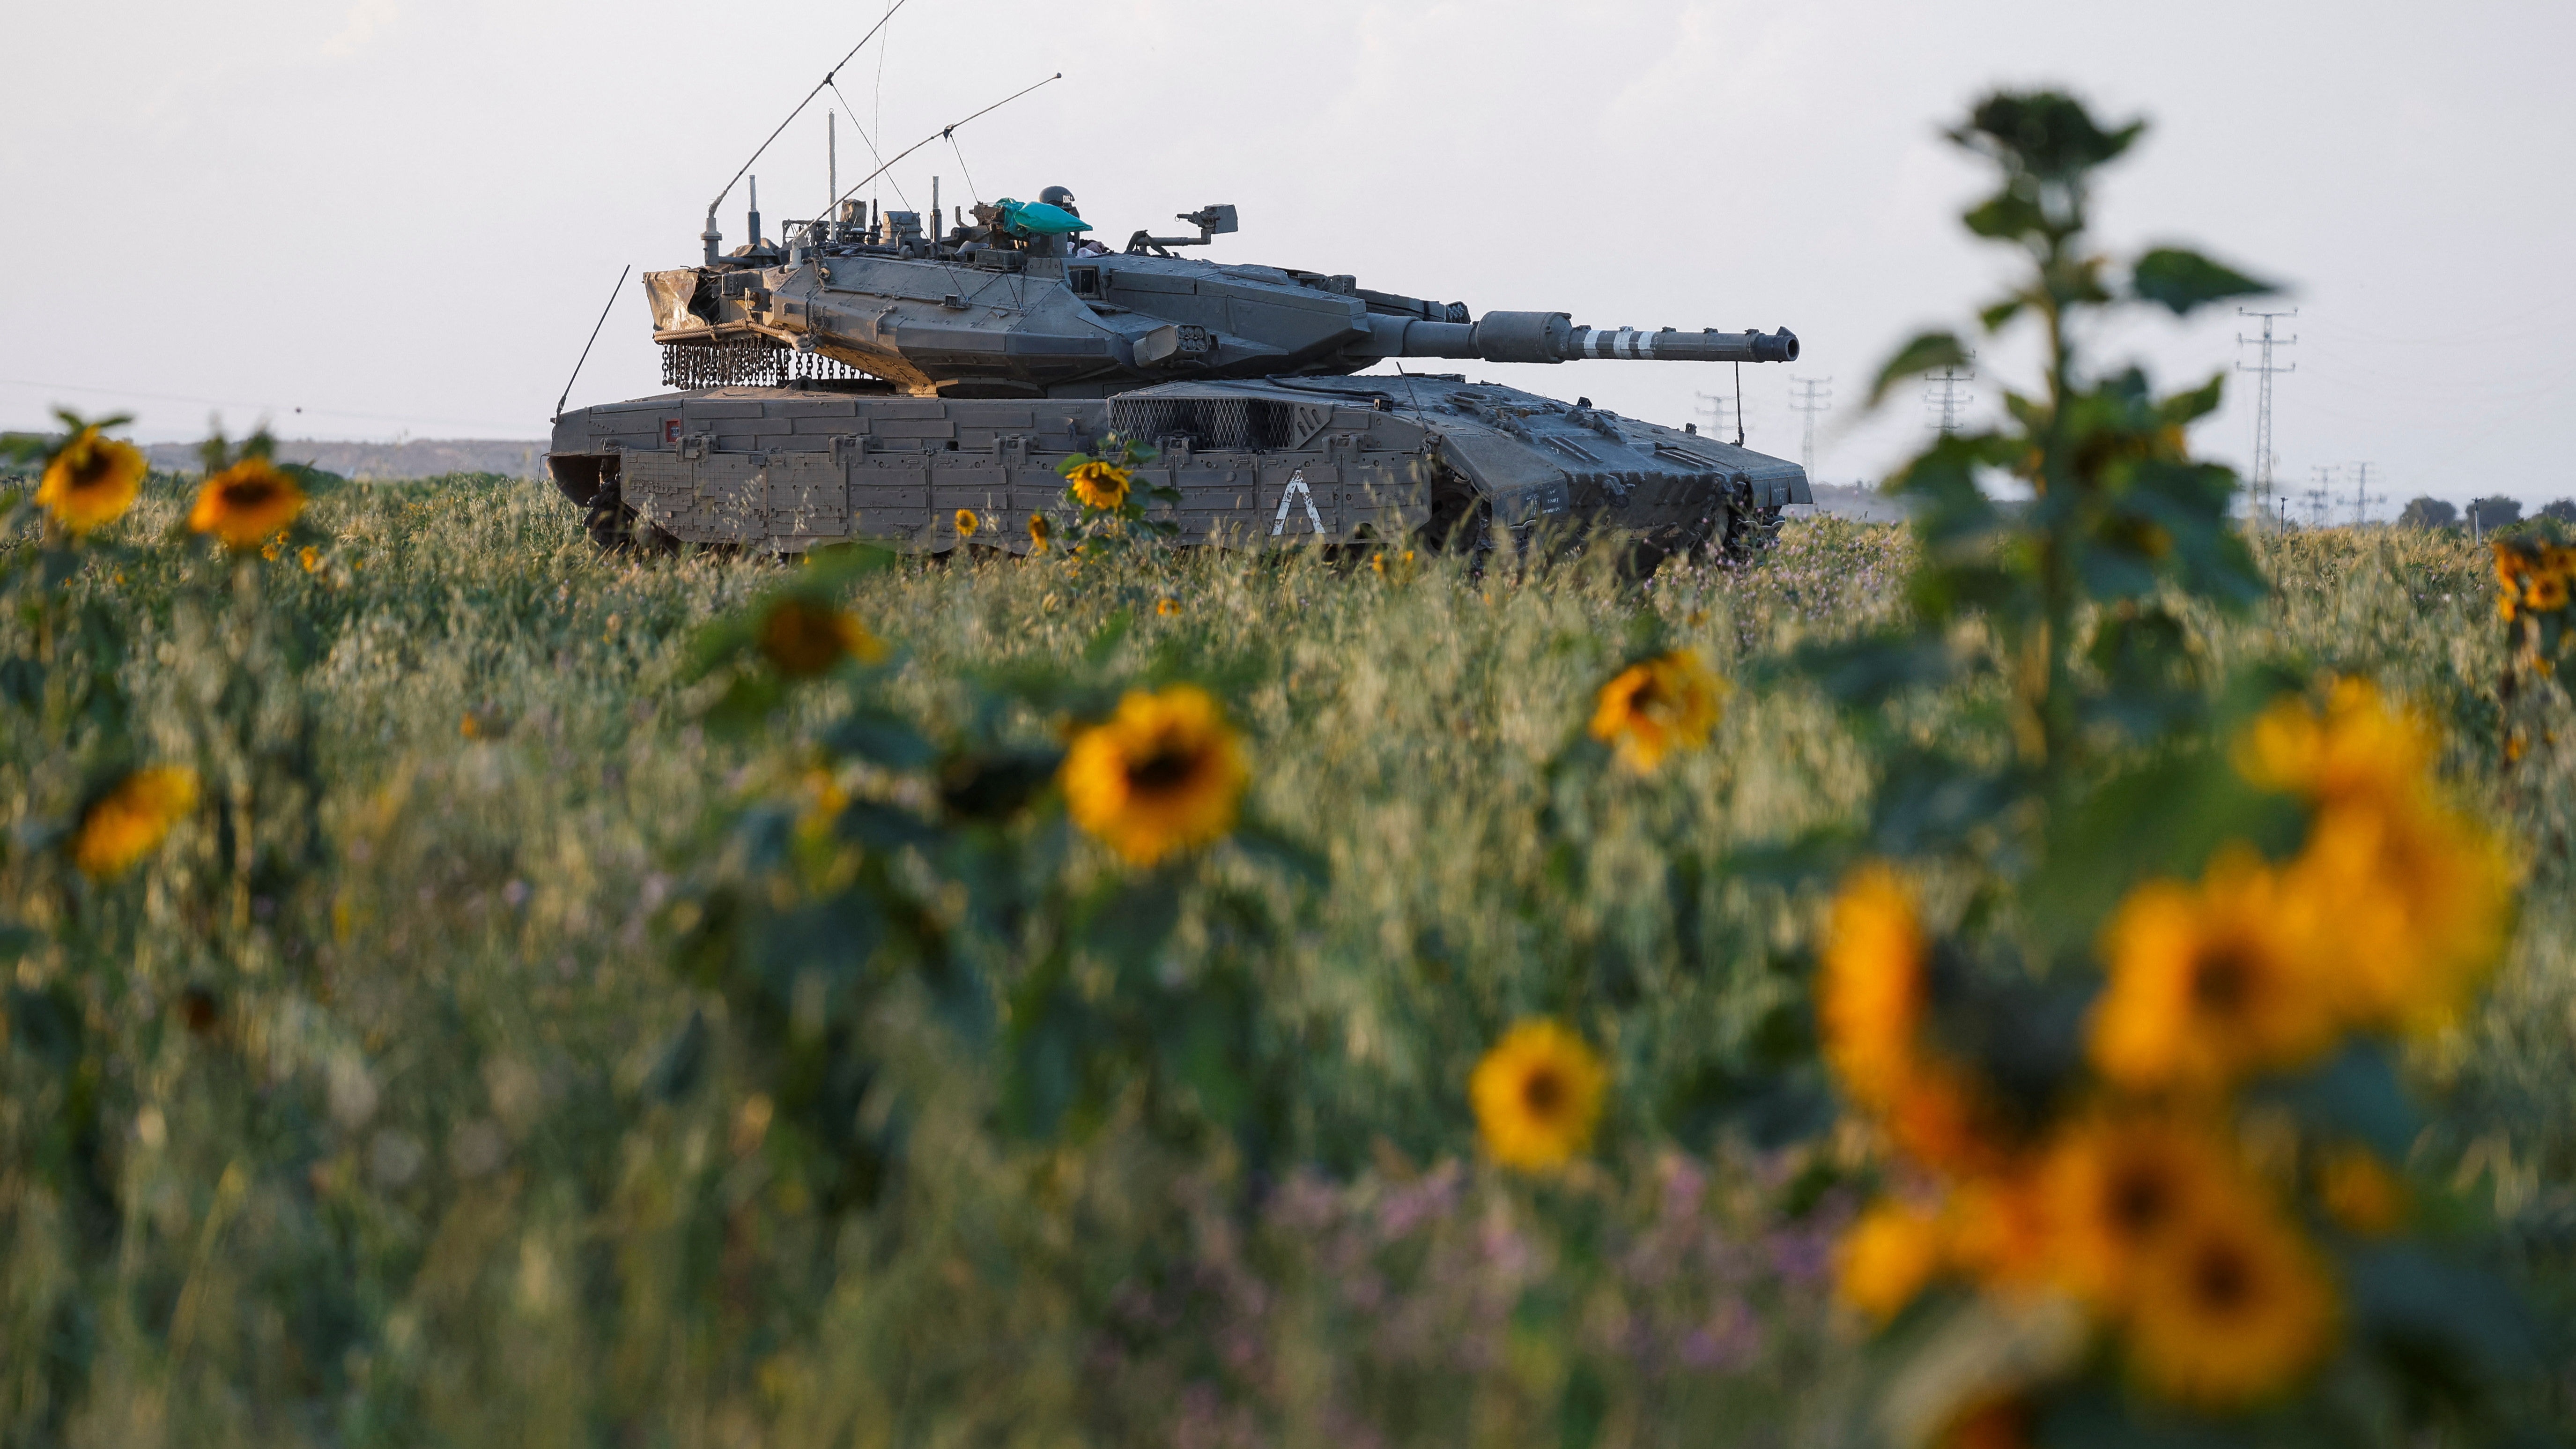 An IDF tank takes up position in a sunflower field near the Gaza border /Amir Cohen/Reuters